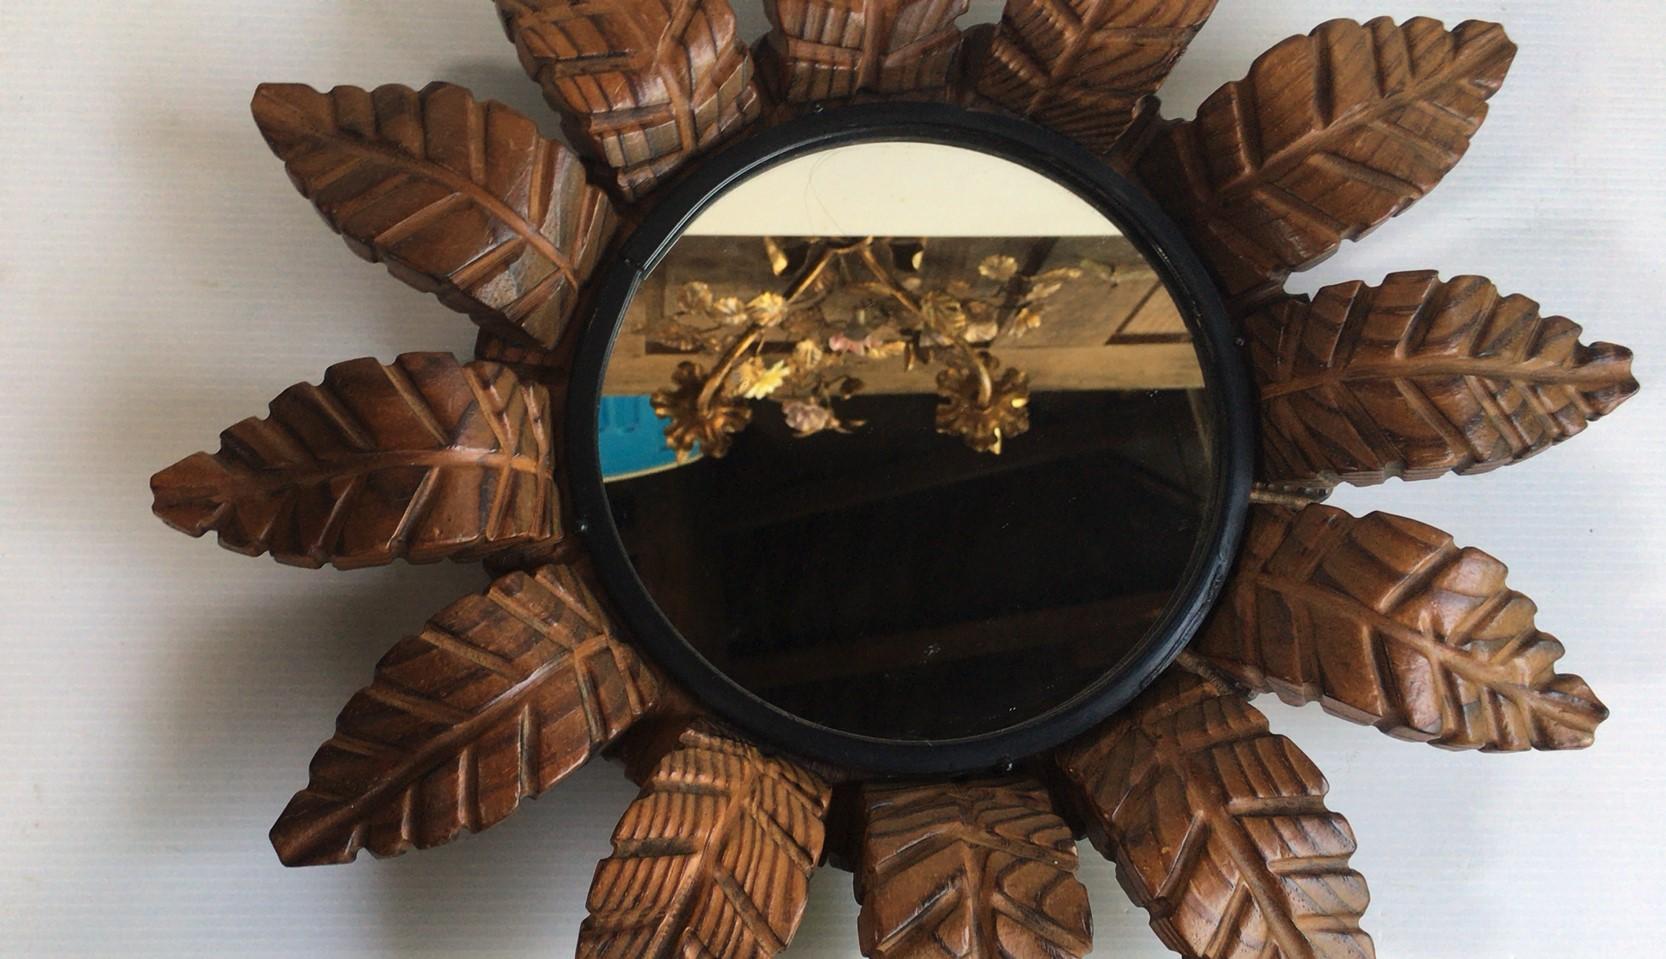 French Art Deco sunburst leaves wood mirror, circa 1930.
I have a second on identical.